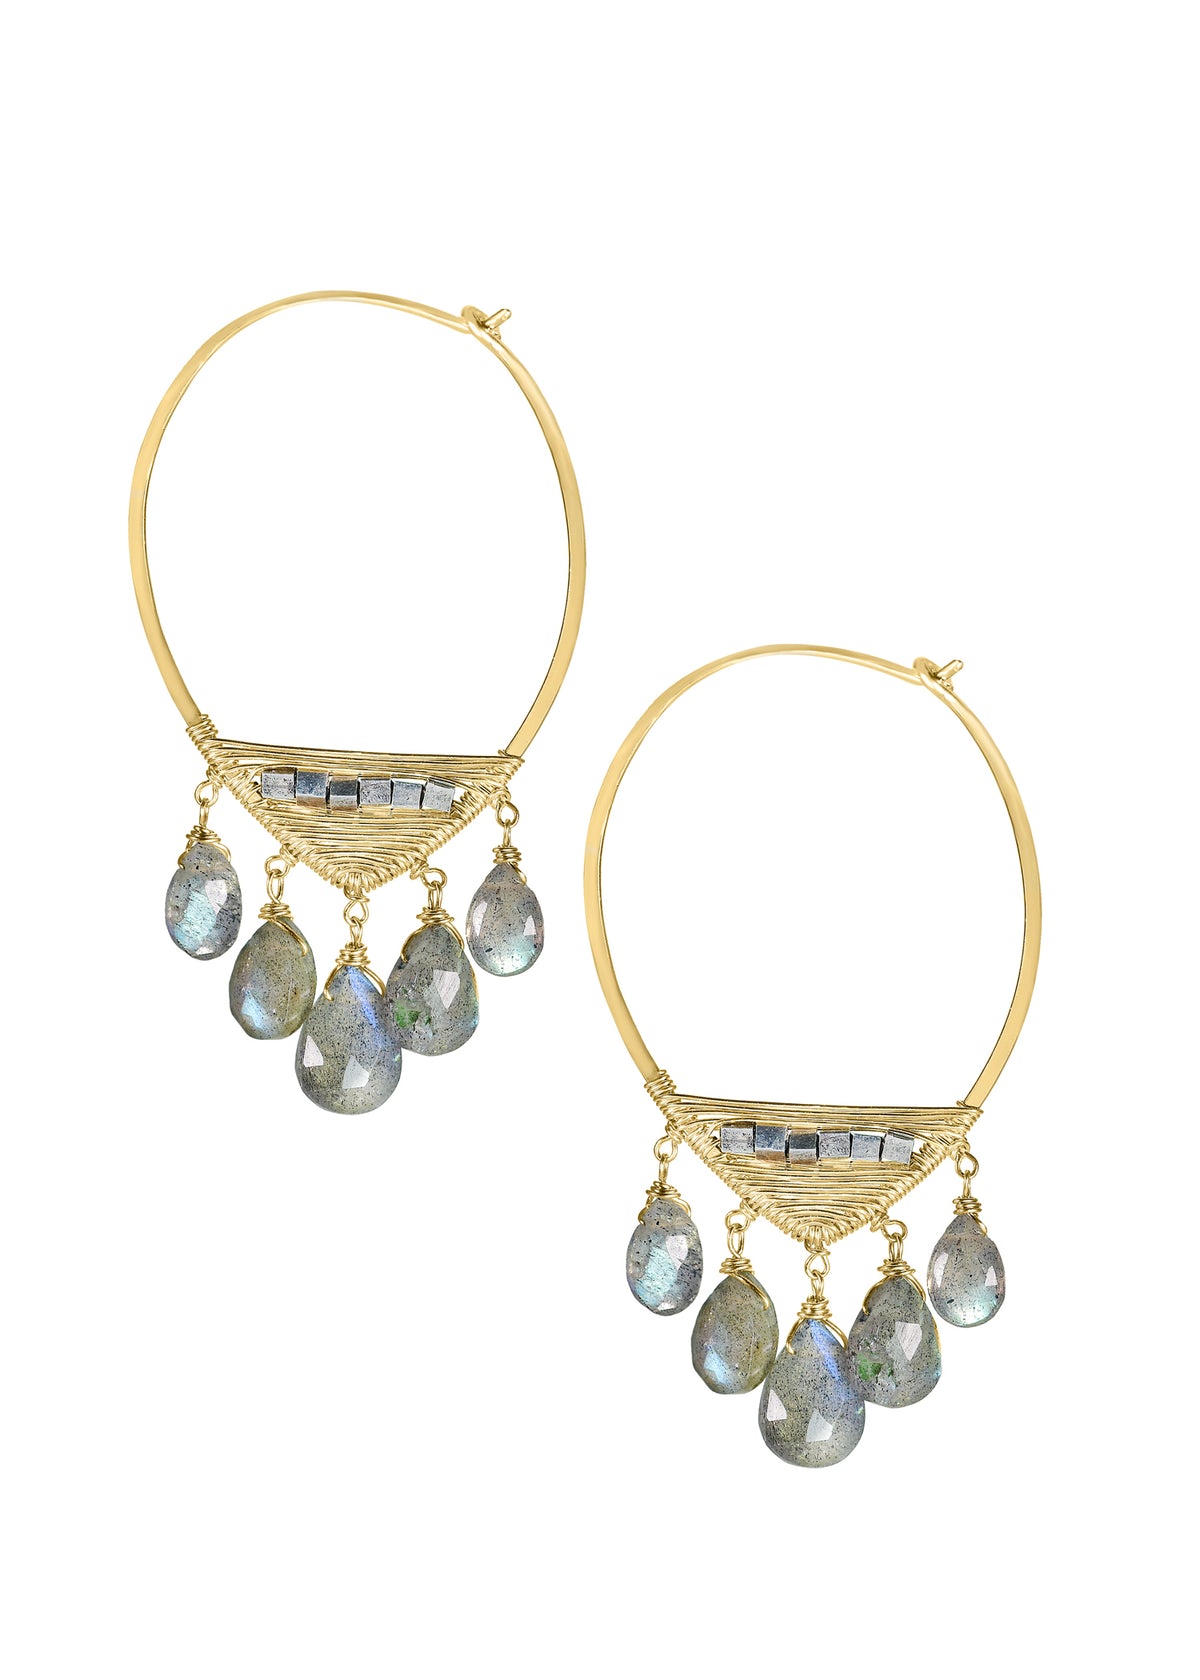 Labradorite 14k gold fill Sterling silver Mixed metal Earrings measure 1-13/16&quot; in length and 1&quot; in width at the widest point Handmade in our Los Angeles studio